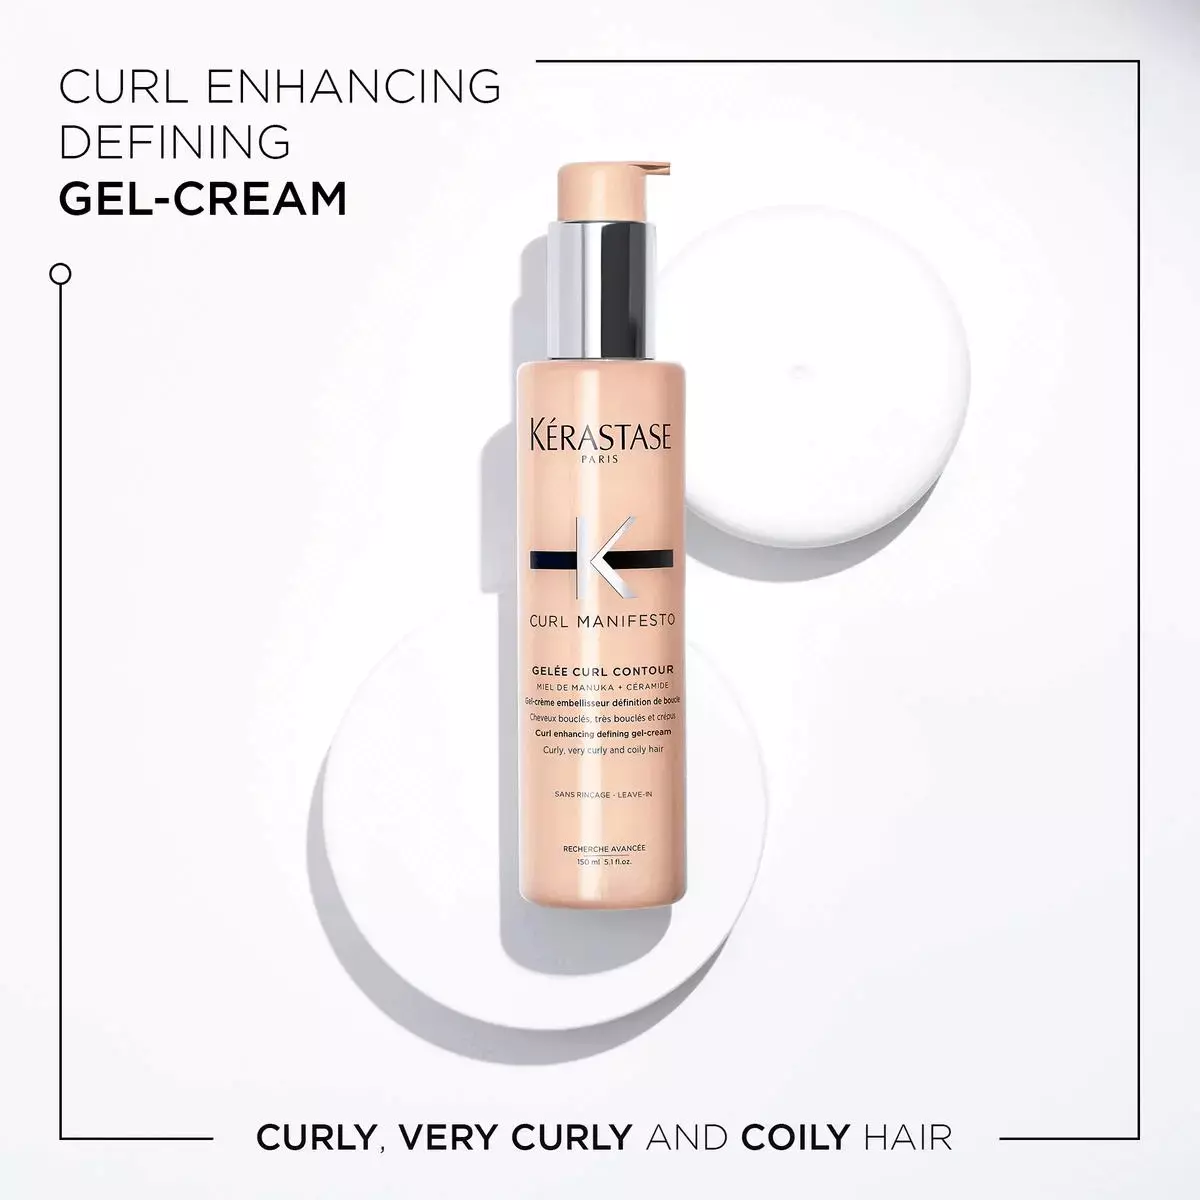  Image 1, Curl Enhancing defining gel-cream- curly, very curly and coily hair. Image 2, Curl Manifesto, up to 87% stronger curls, more nourishment, more curl definition. Image 3, Key ingredients, ceramide, manuka honey. Image 4, Before and After image- Illustration of the anticipated results obtained after applying the products bain hydrant douceur fondant hydration essentielle, creme de jour fondamentale and gelee Curl contour after one use and styling. Results may vary from one individual to another.